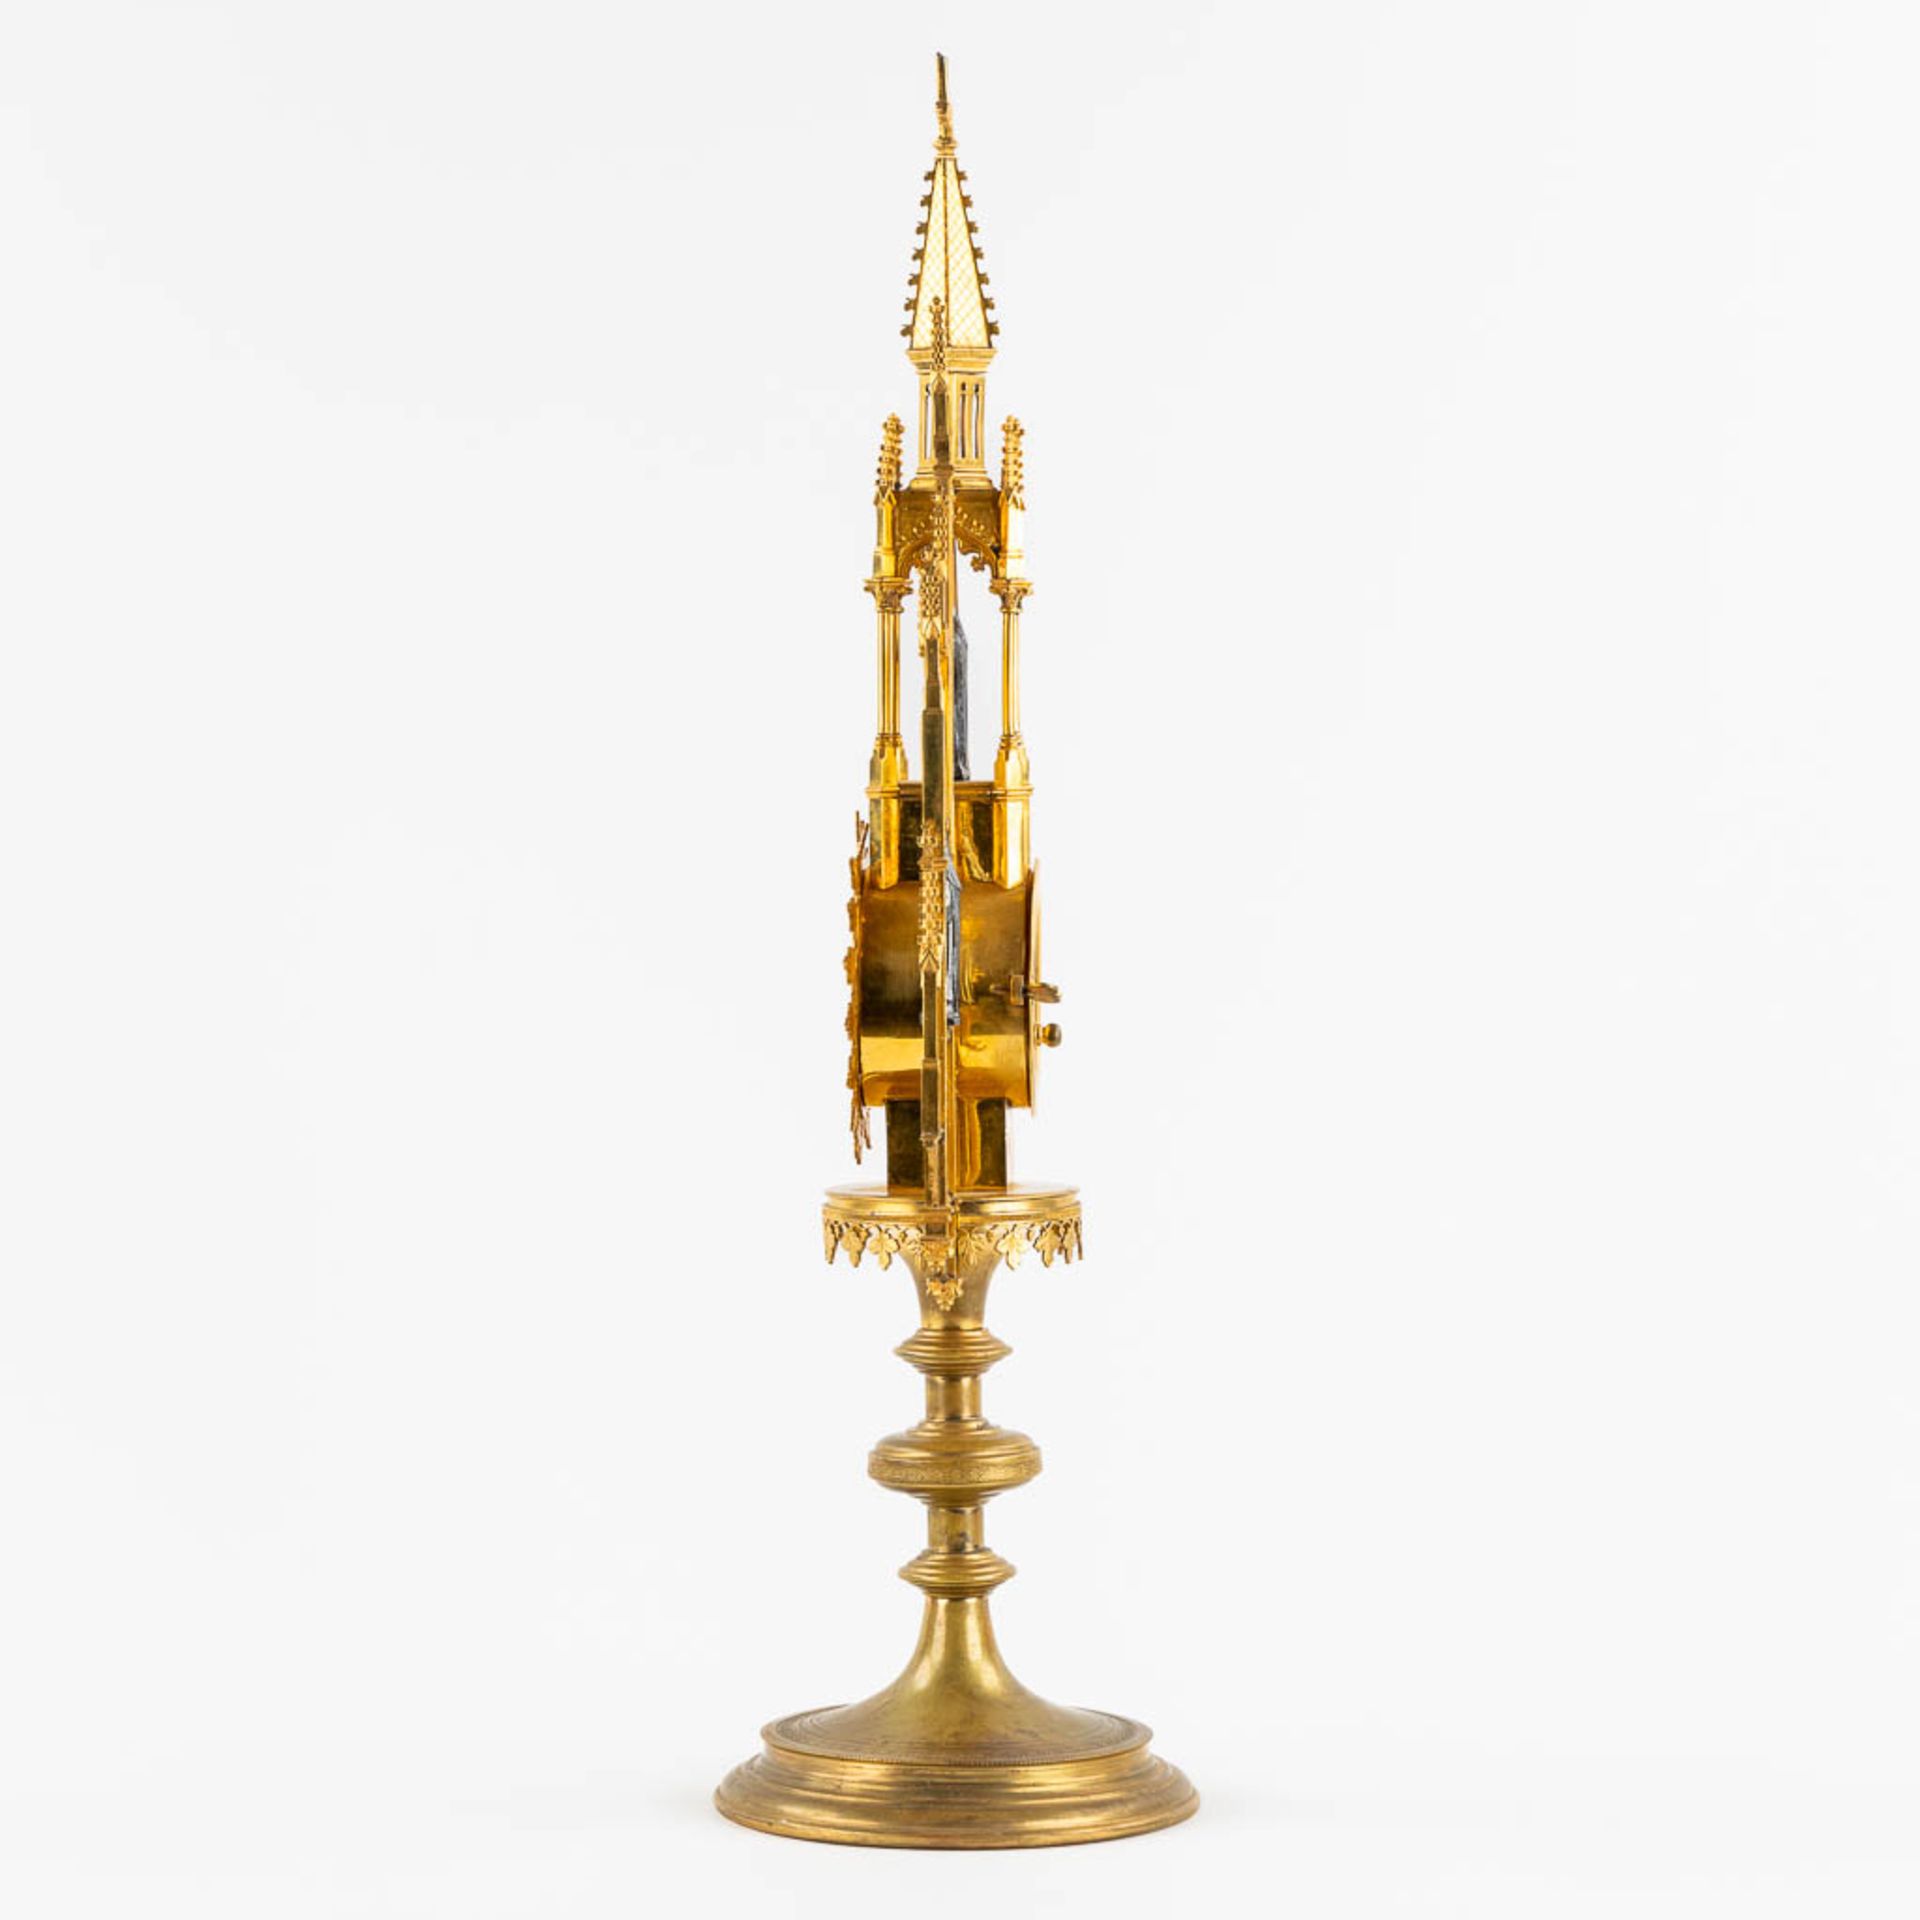 A Tower monstrance, gilt and silver plated brass, Gothic Revival. 19th C. (W:21,5 x H:58 cm) - Bild 12 aus 22